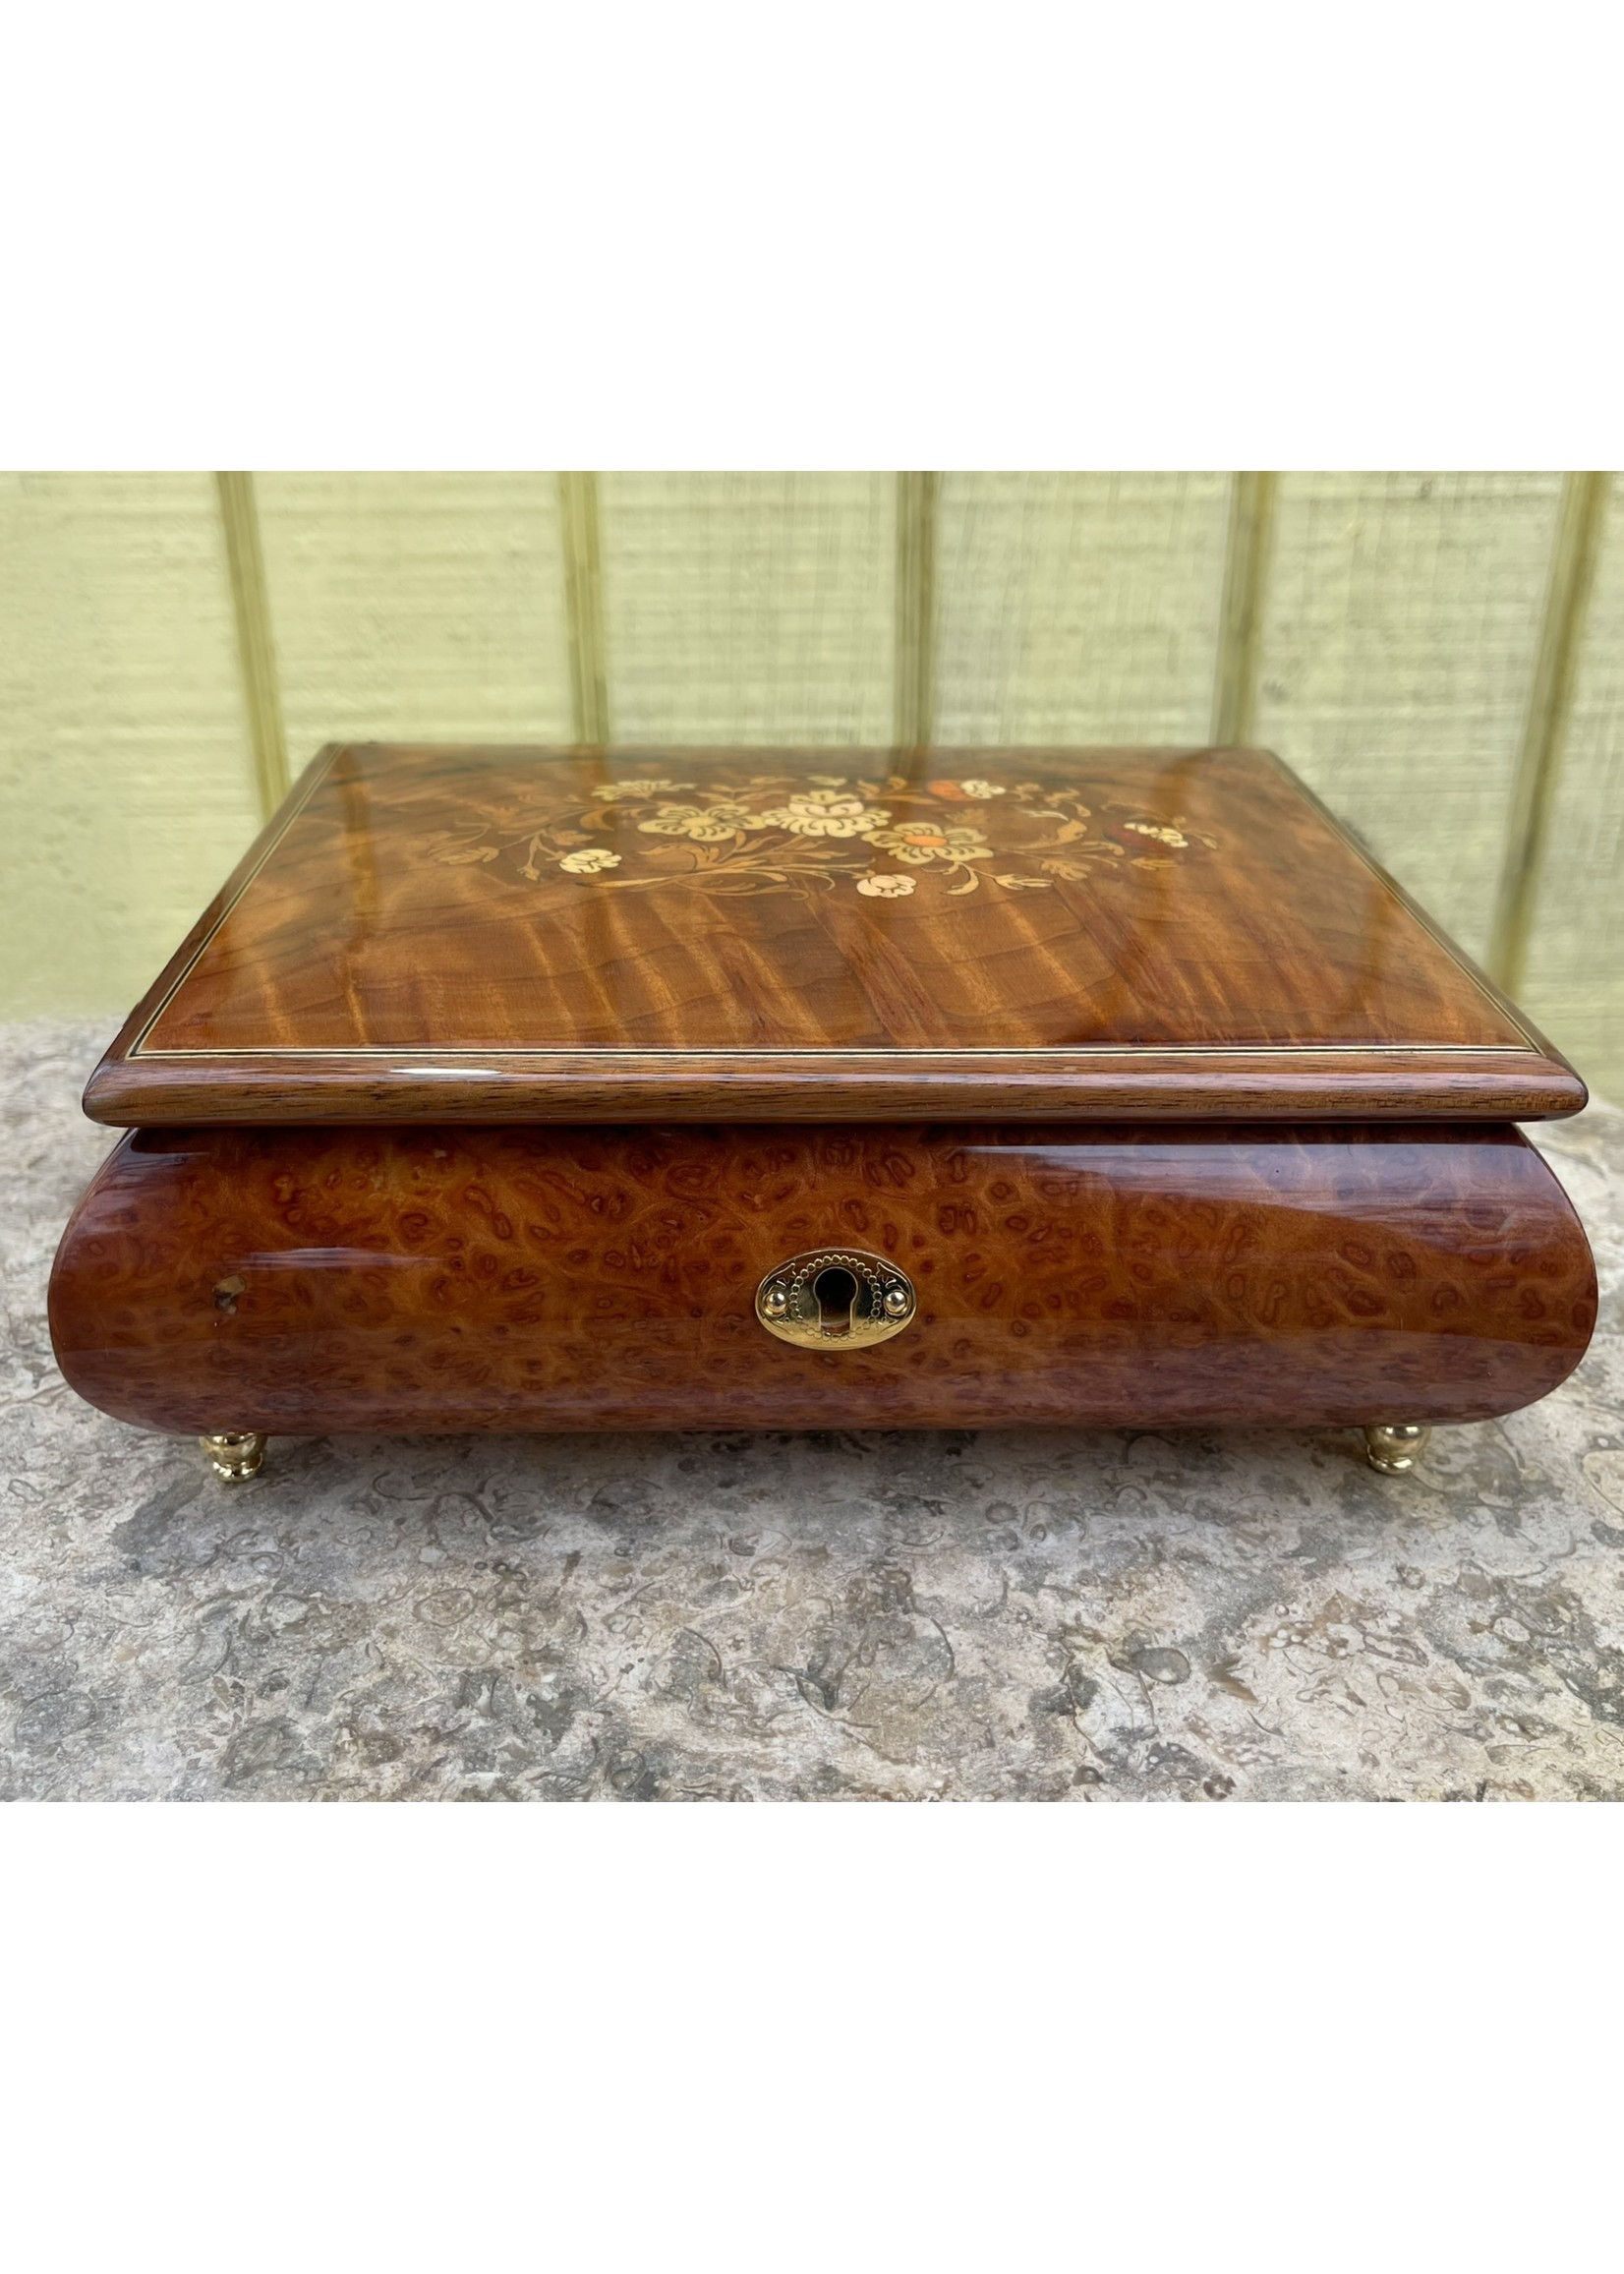 Timeless Musical jewelry box  small wooden